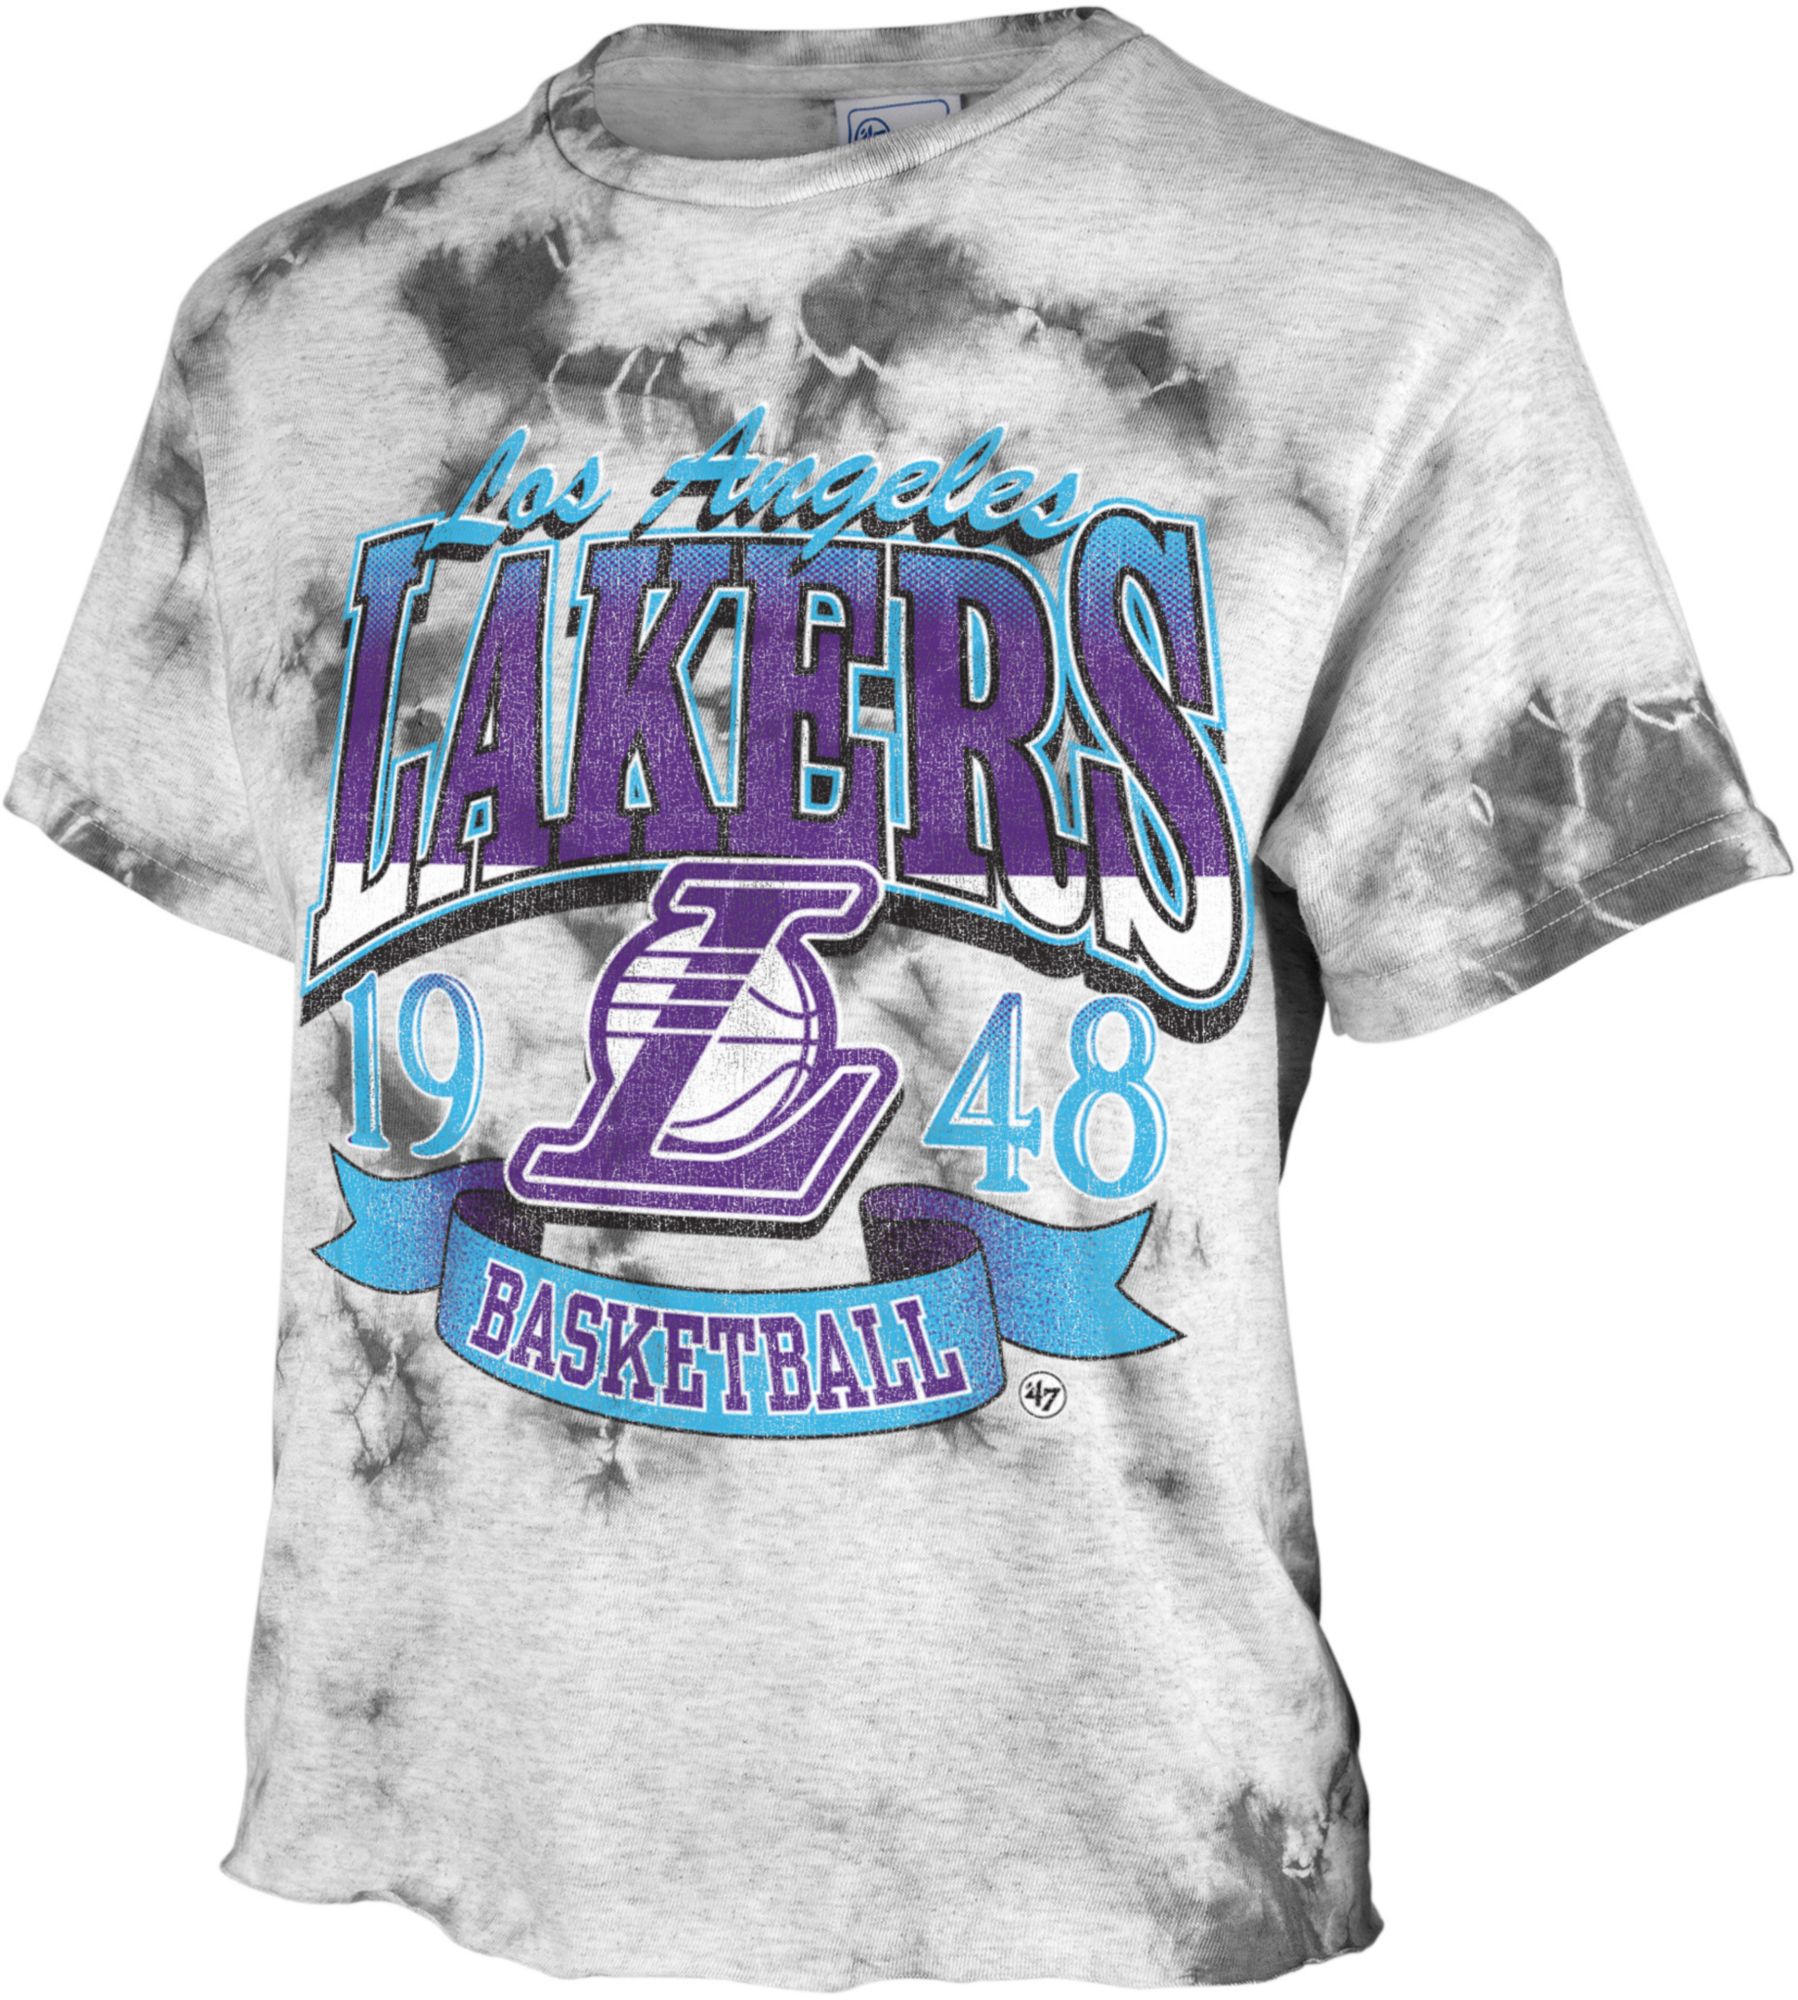 Official los angeles Lakers lake show city edition logo T-shirt